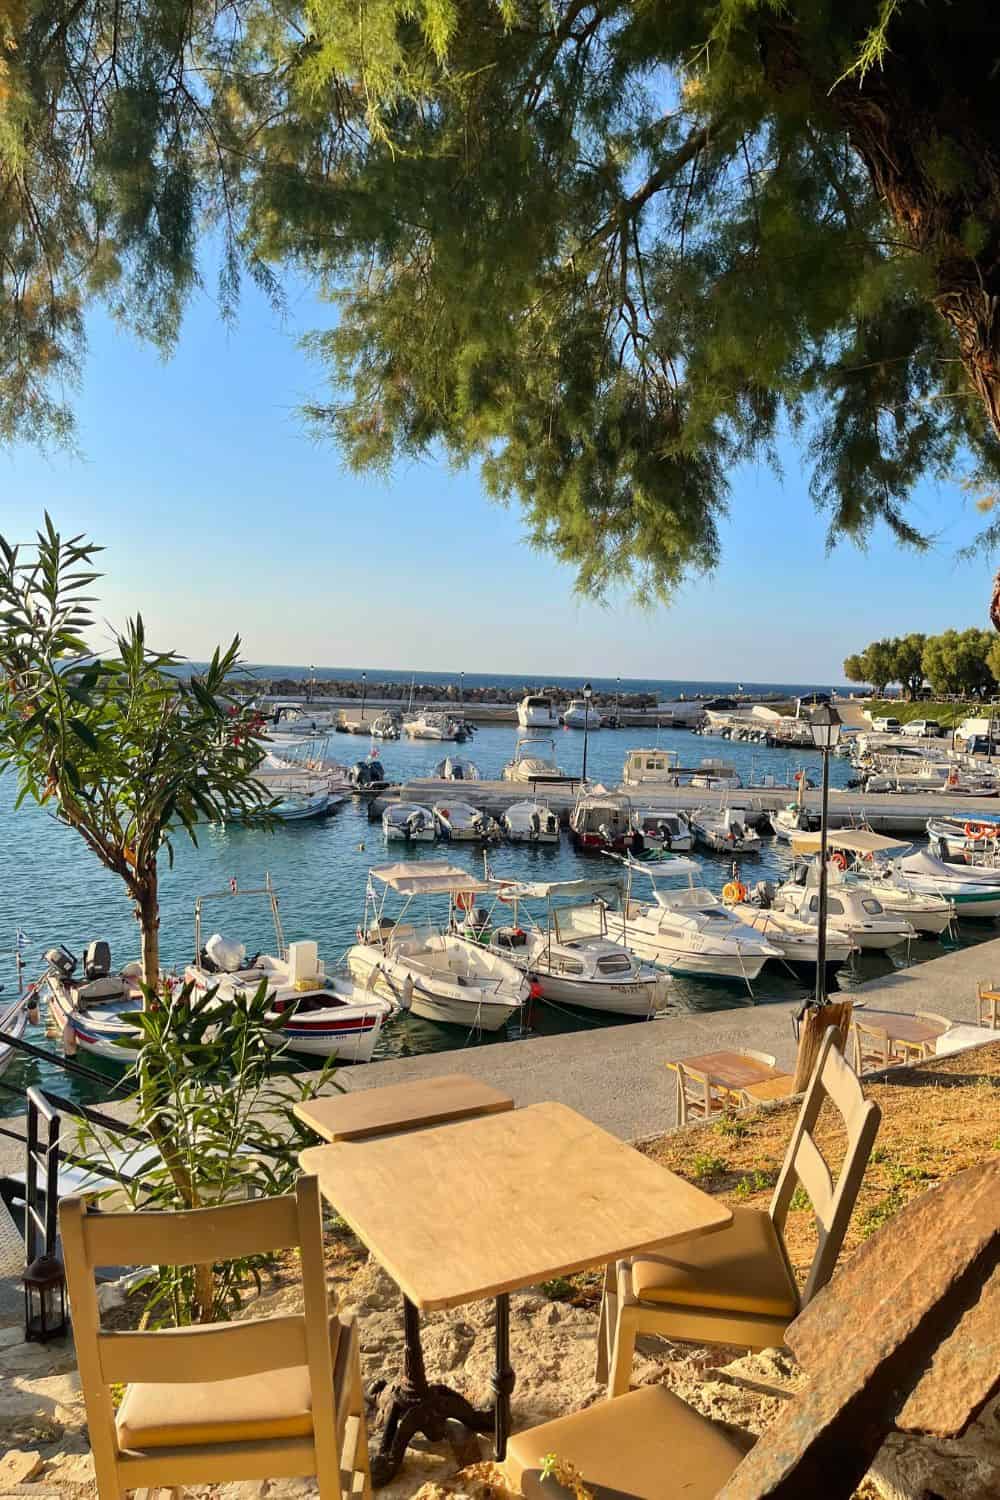 Calm afternoon at a Chania café overlooking the marina filled with boats, with the lush greenery of a tree framing the top corner.